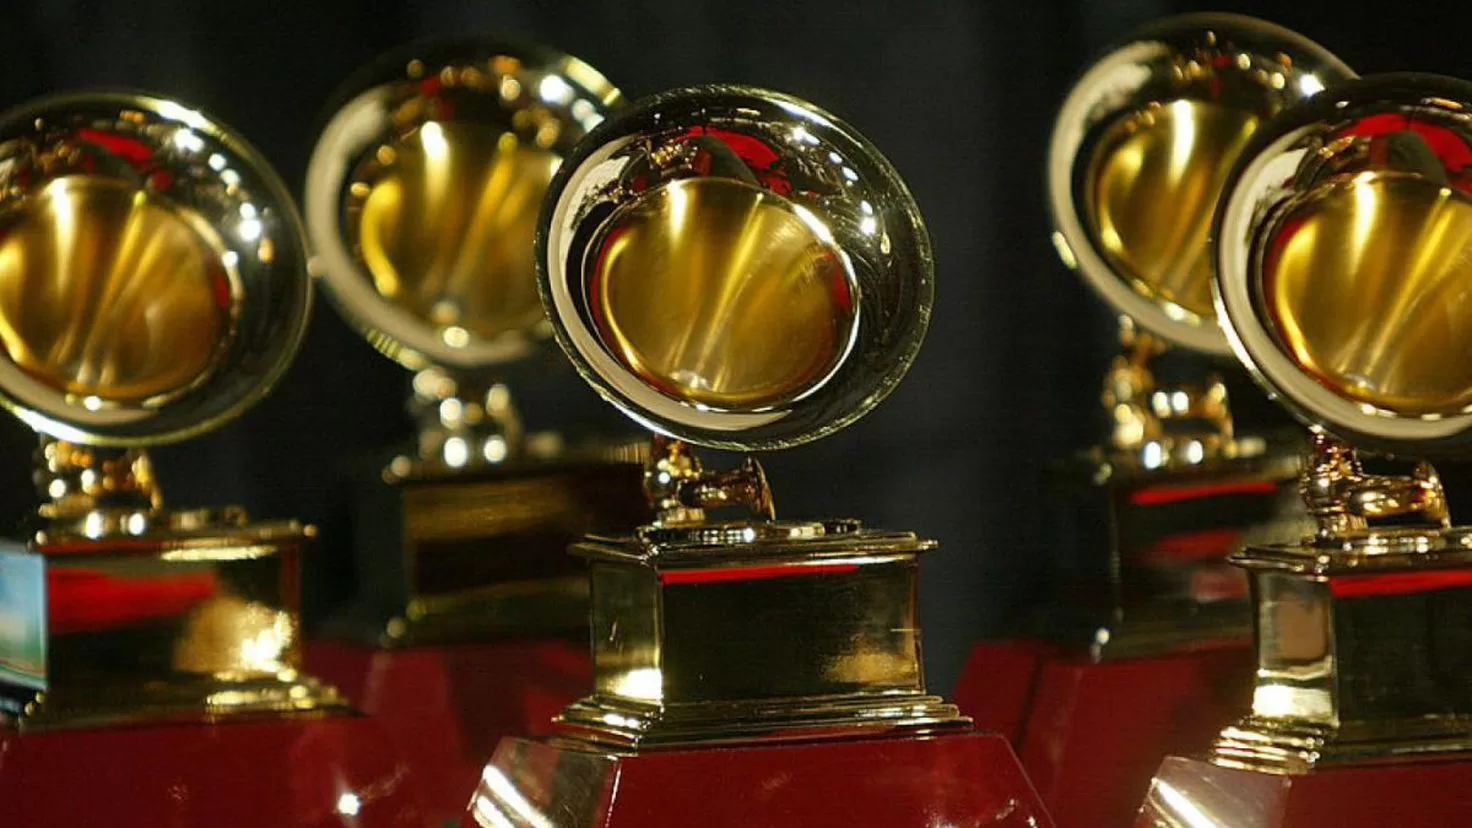 What are the differences between the Grammy Awards and the Latin Grammys?
